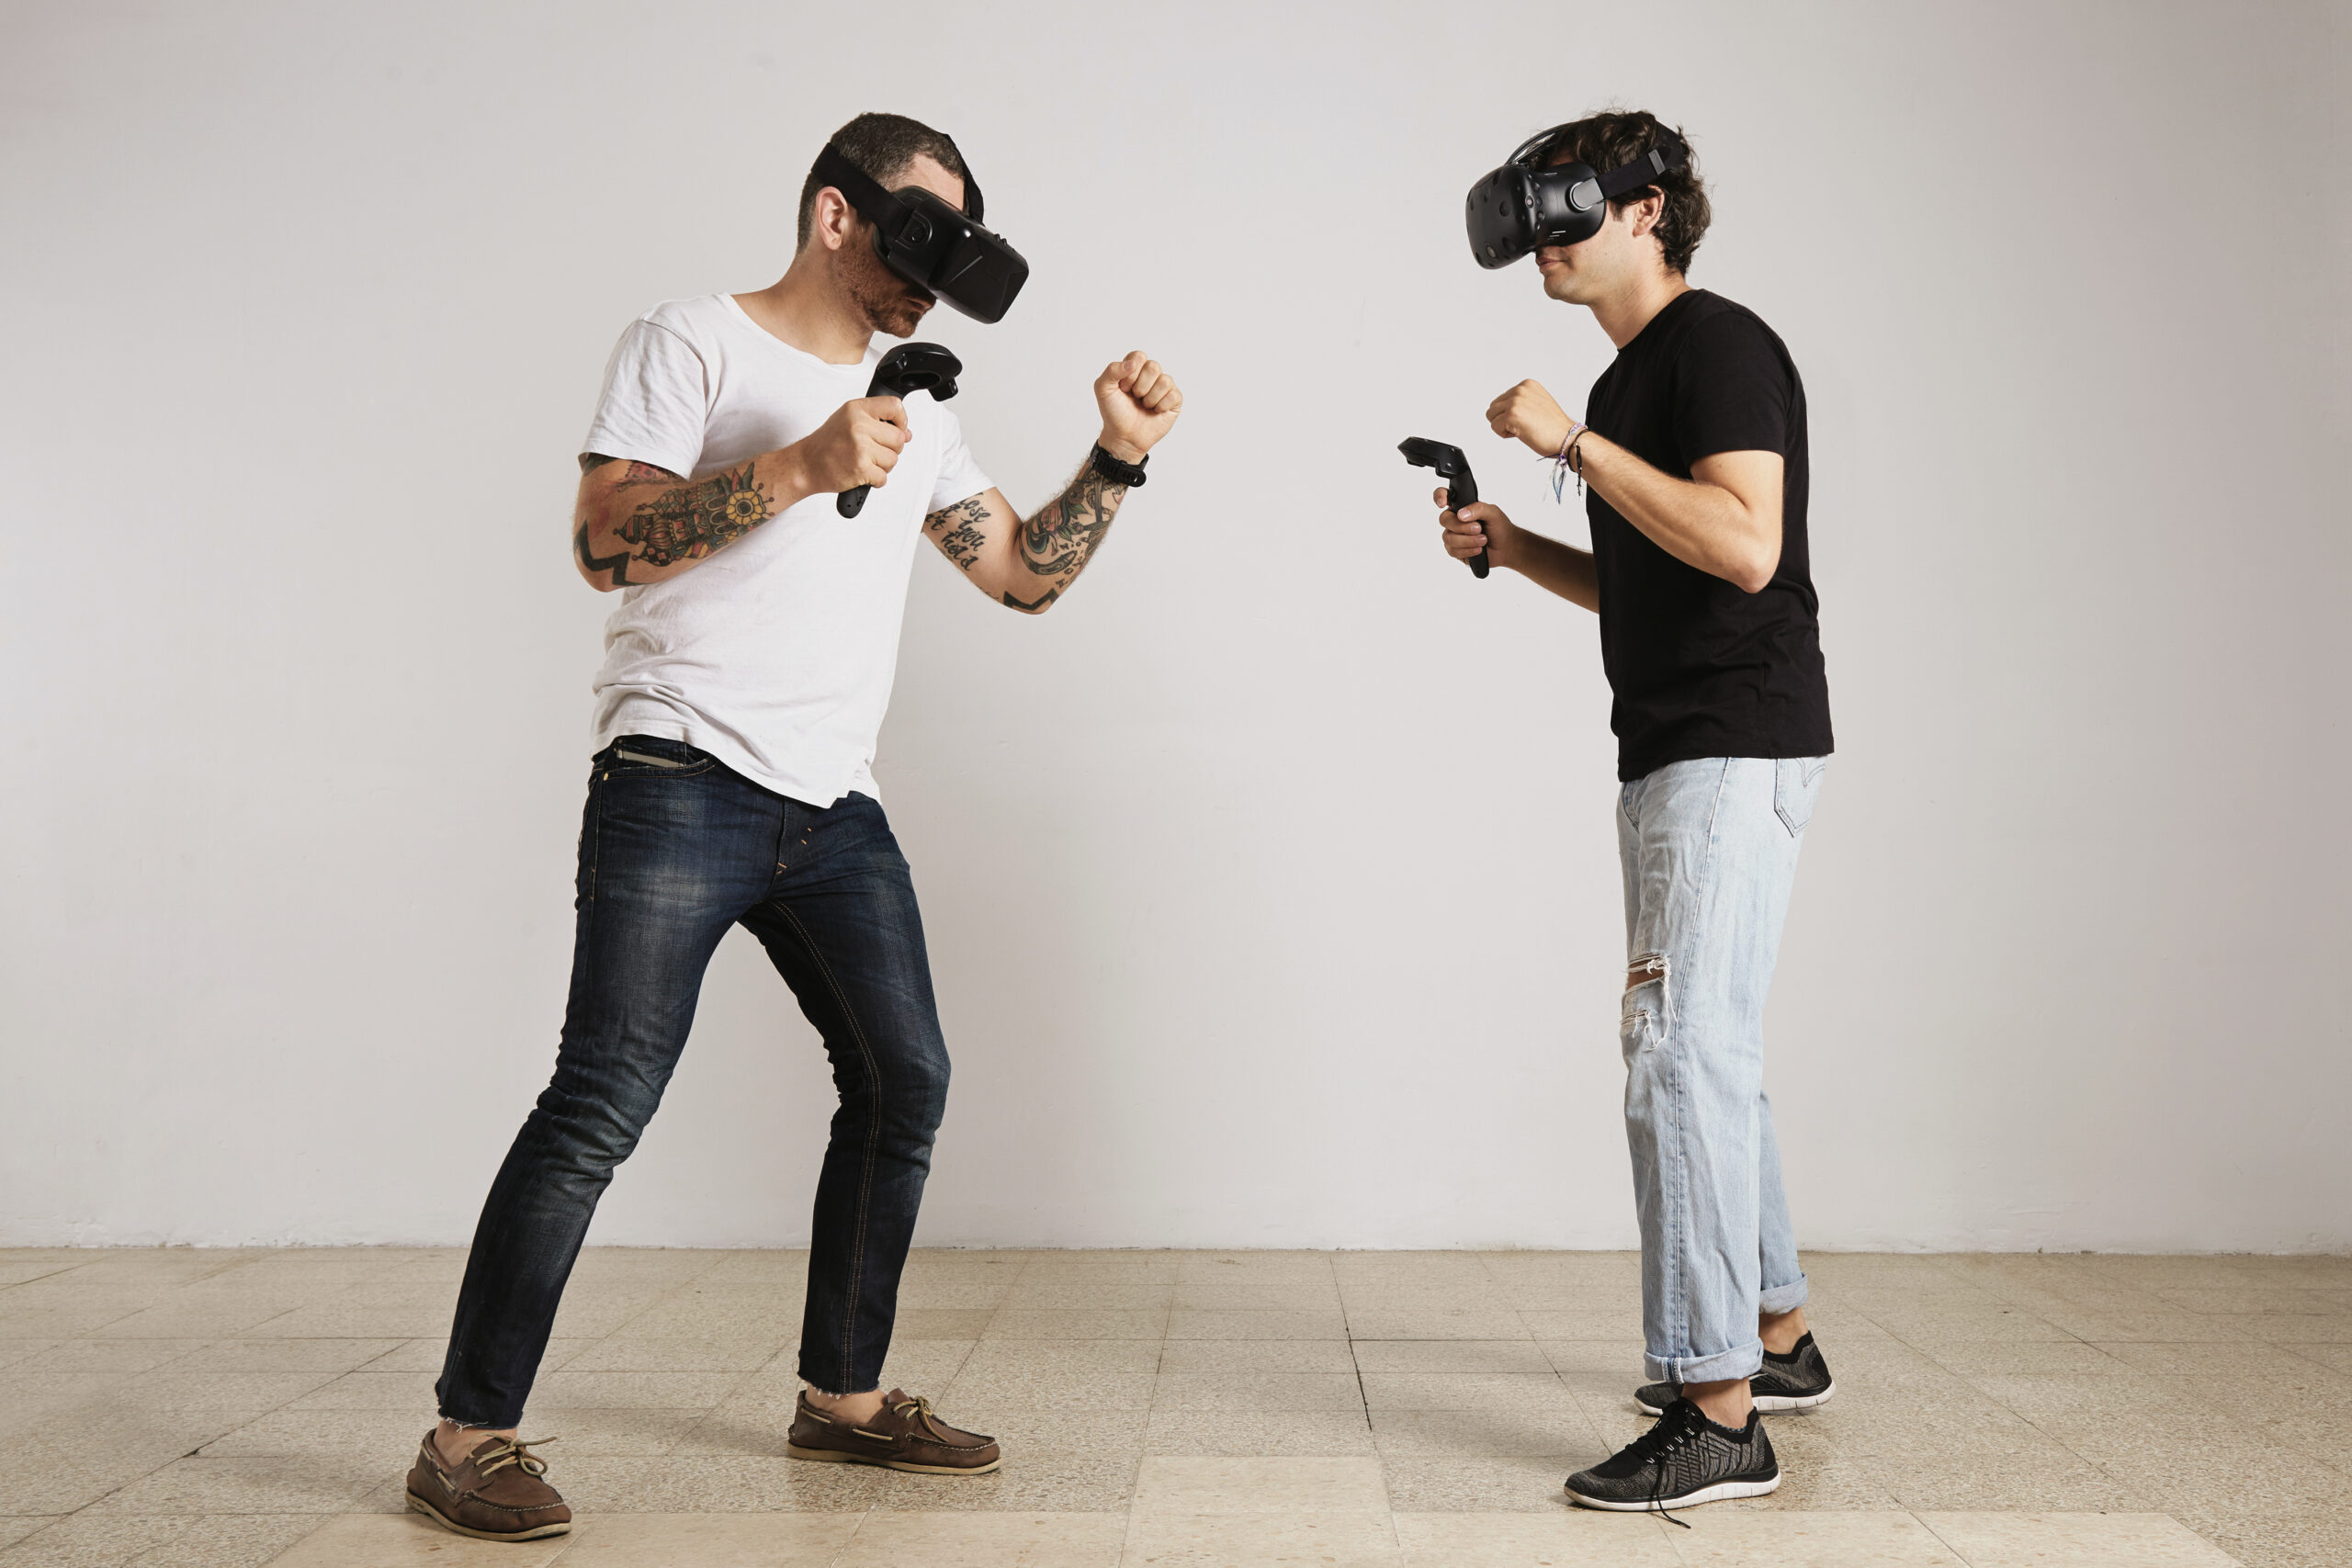 man white unlabeled t shirt with bear tattoos man black unlabeled t shirt wearing vr headsets fight room with white walls scaled